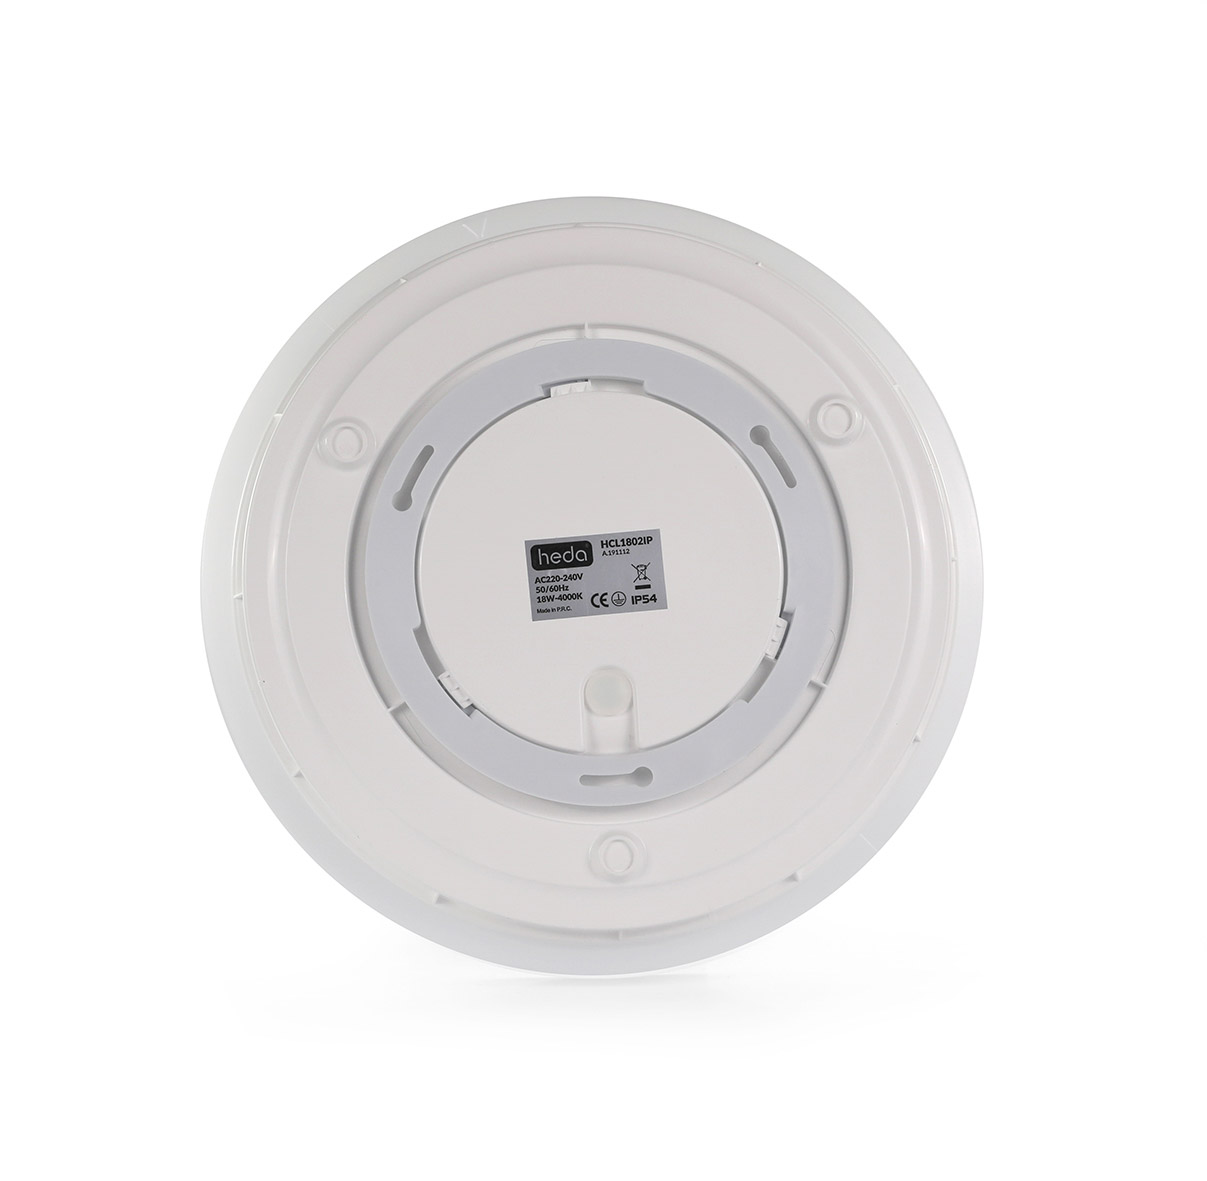 HCL1802IP Ceiling lamp with sensor